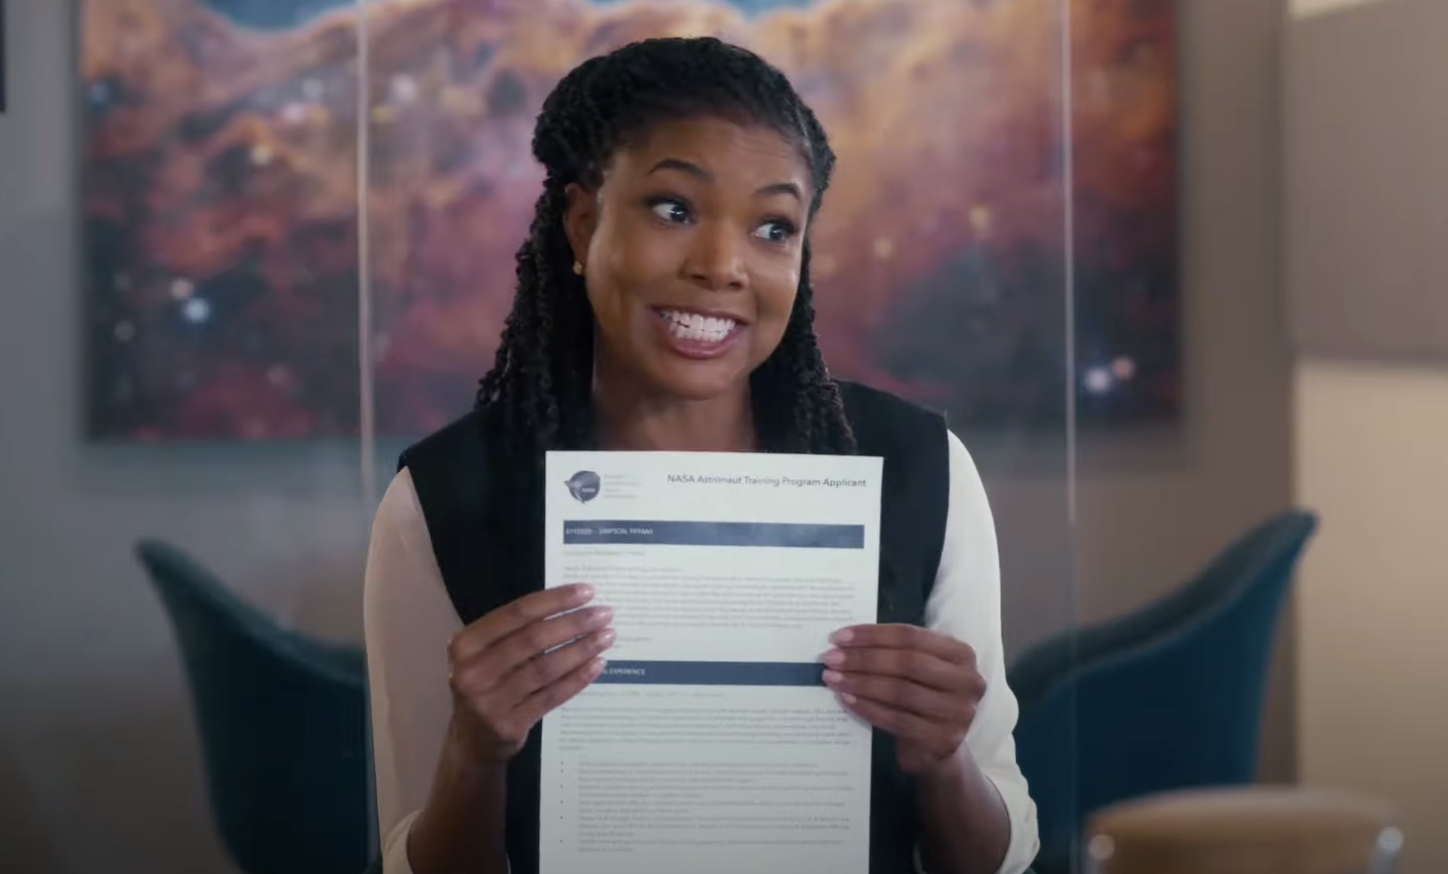 'Space Cadet' Trailer: Gabrielle Union Tests Emma Roberts' NASA Qualifications In New Prime Video Film